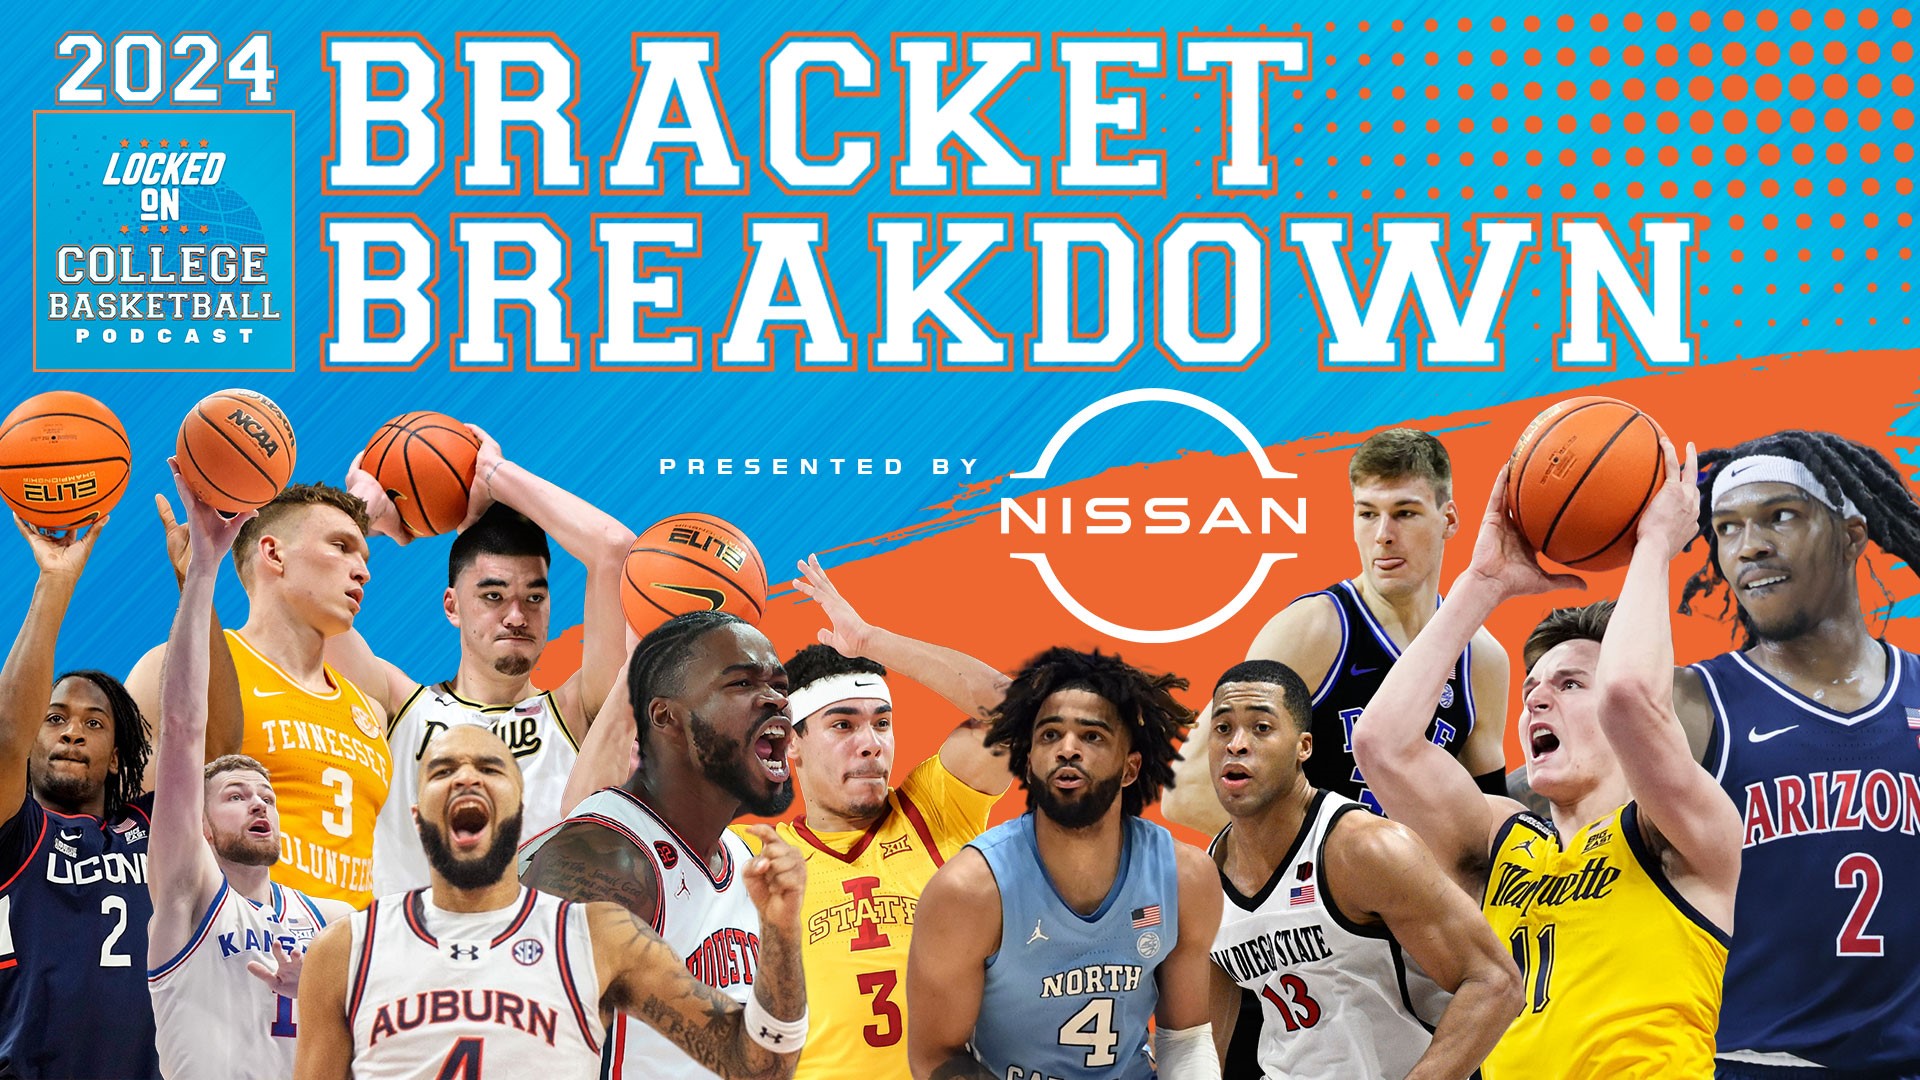 Locked On College Basketball hosts shares what you need to know for March Madness. Will UConn, Houston, Purdue and North Carolina hold true to number one seeds?